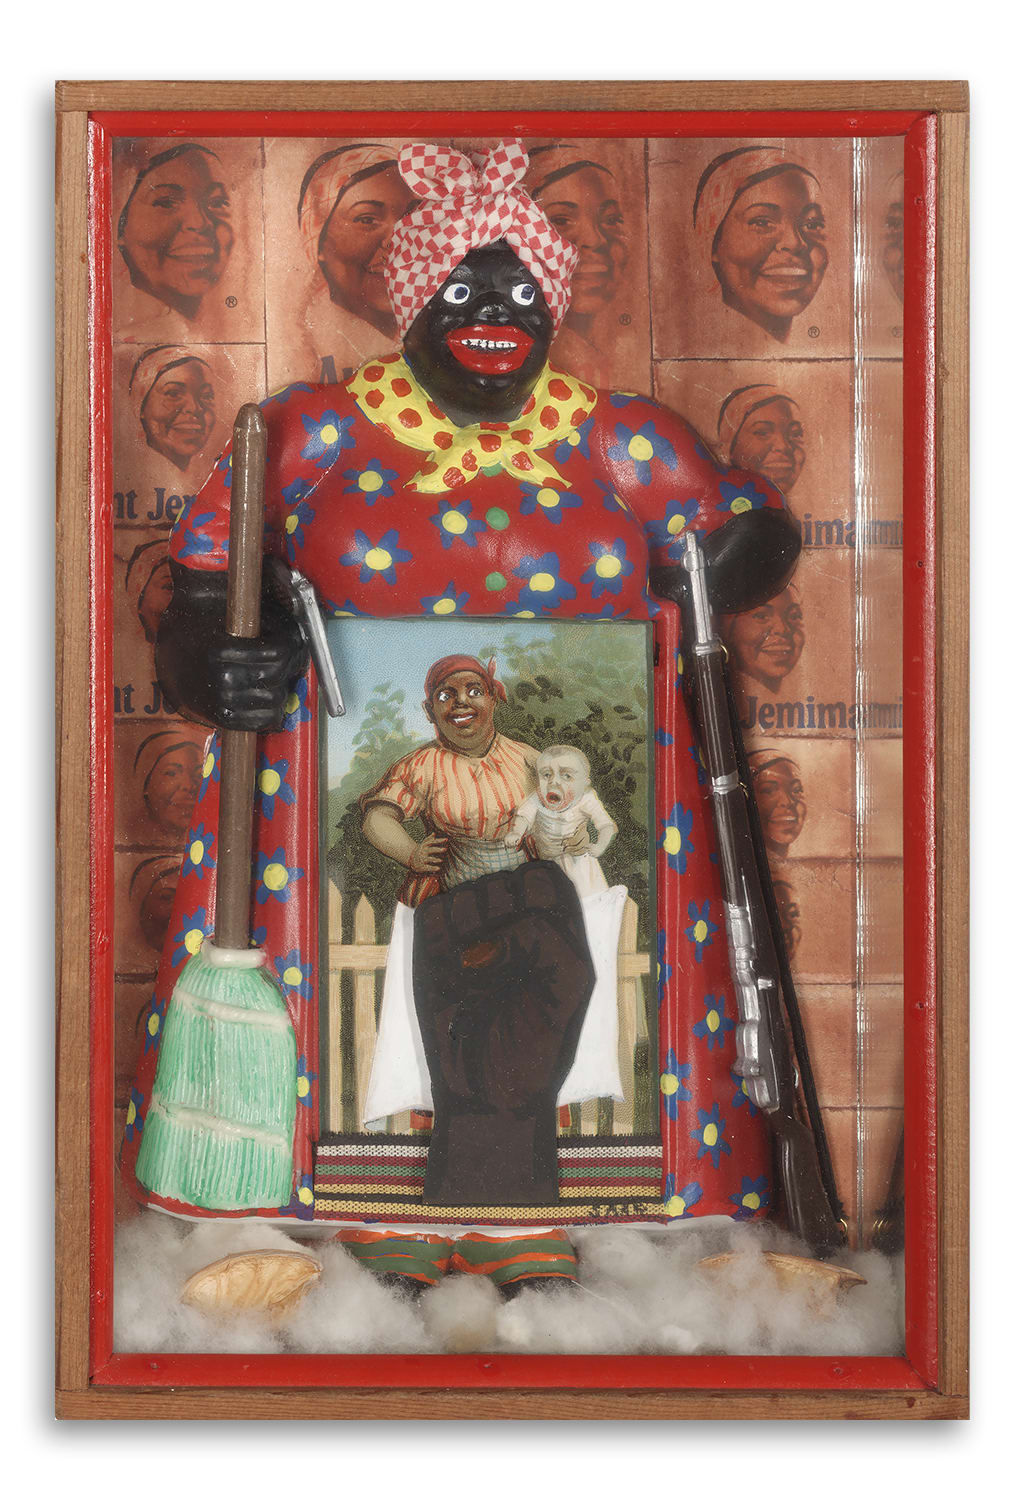 Betye Saar, Liberation of Aunt Jemima, 1972. Mixed media assemblage, 11.75 x 8 x 2.75 in. Collection of Berkeley Art Museum and Pacific Film Archive, Berkeley, California. Purchased with the aid of funds from the National Endowment for the Arts, selected by The Committee for the Acquisition of Afro-American Art. Courtesy of the artist and Roberts Projects, Los Angeles. Photo by Benjamin Blackwell.